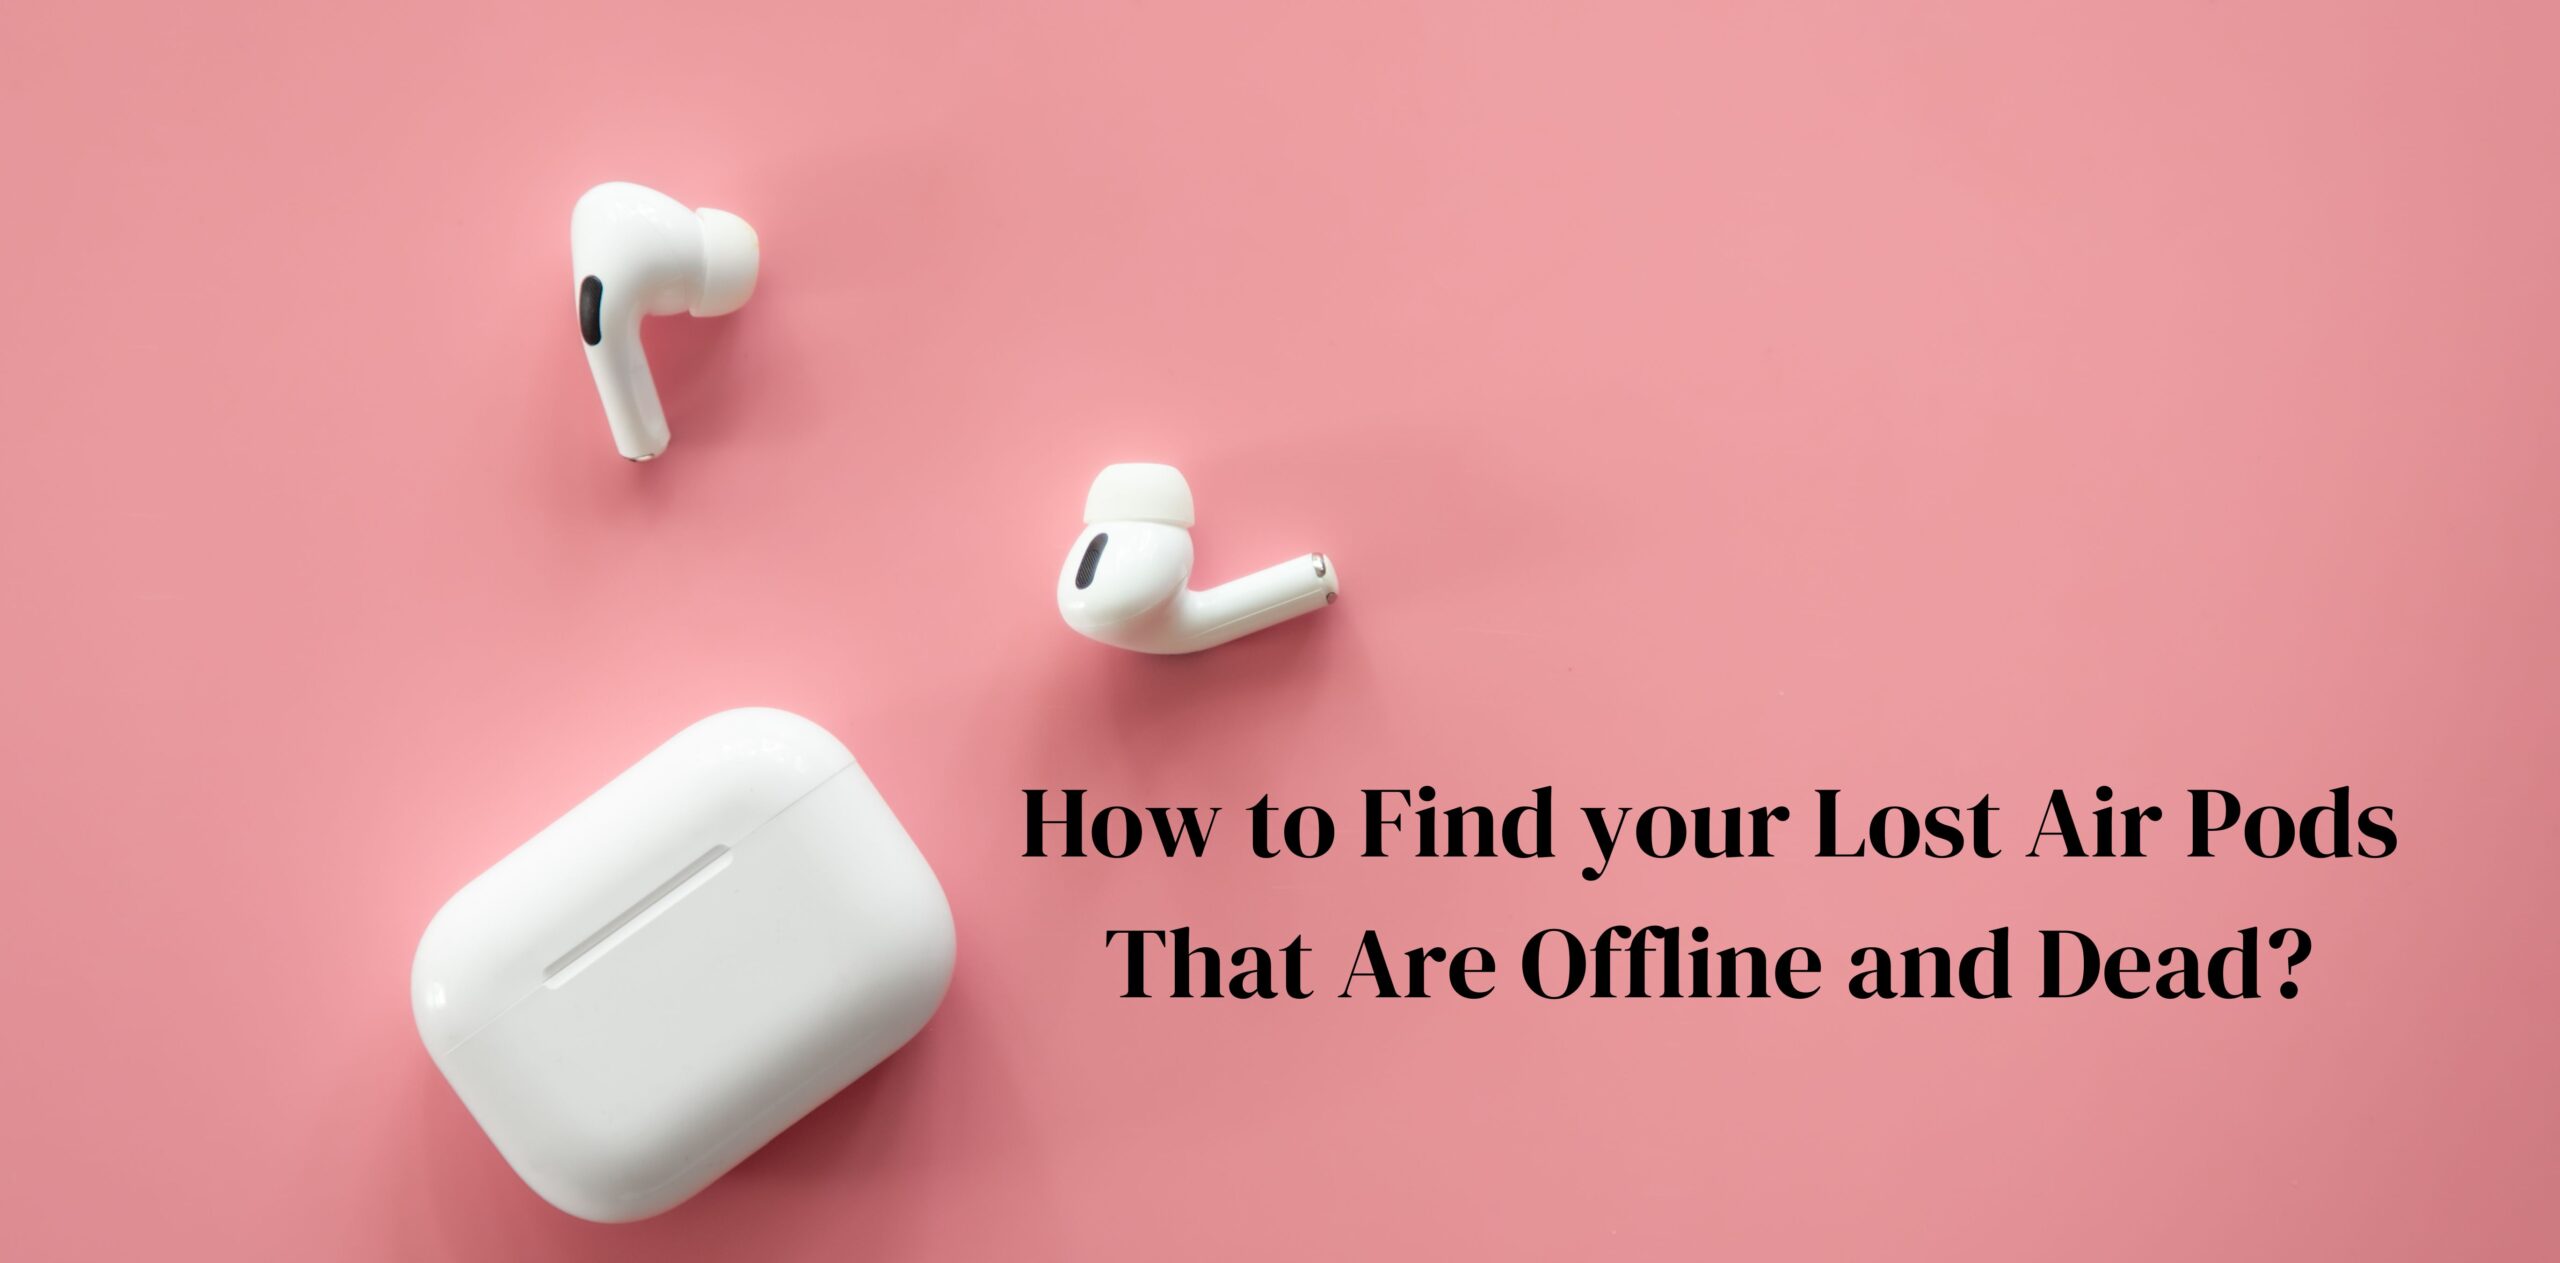 How to Find your Lost Air Pods That Are Offline and Dead?